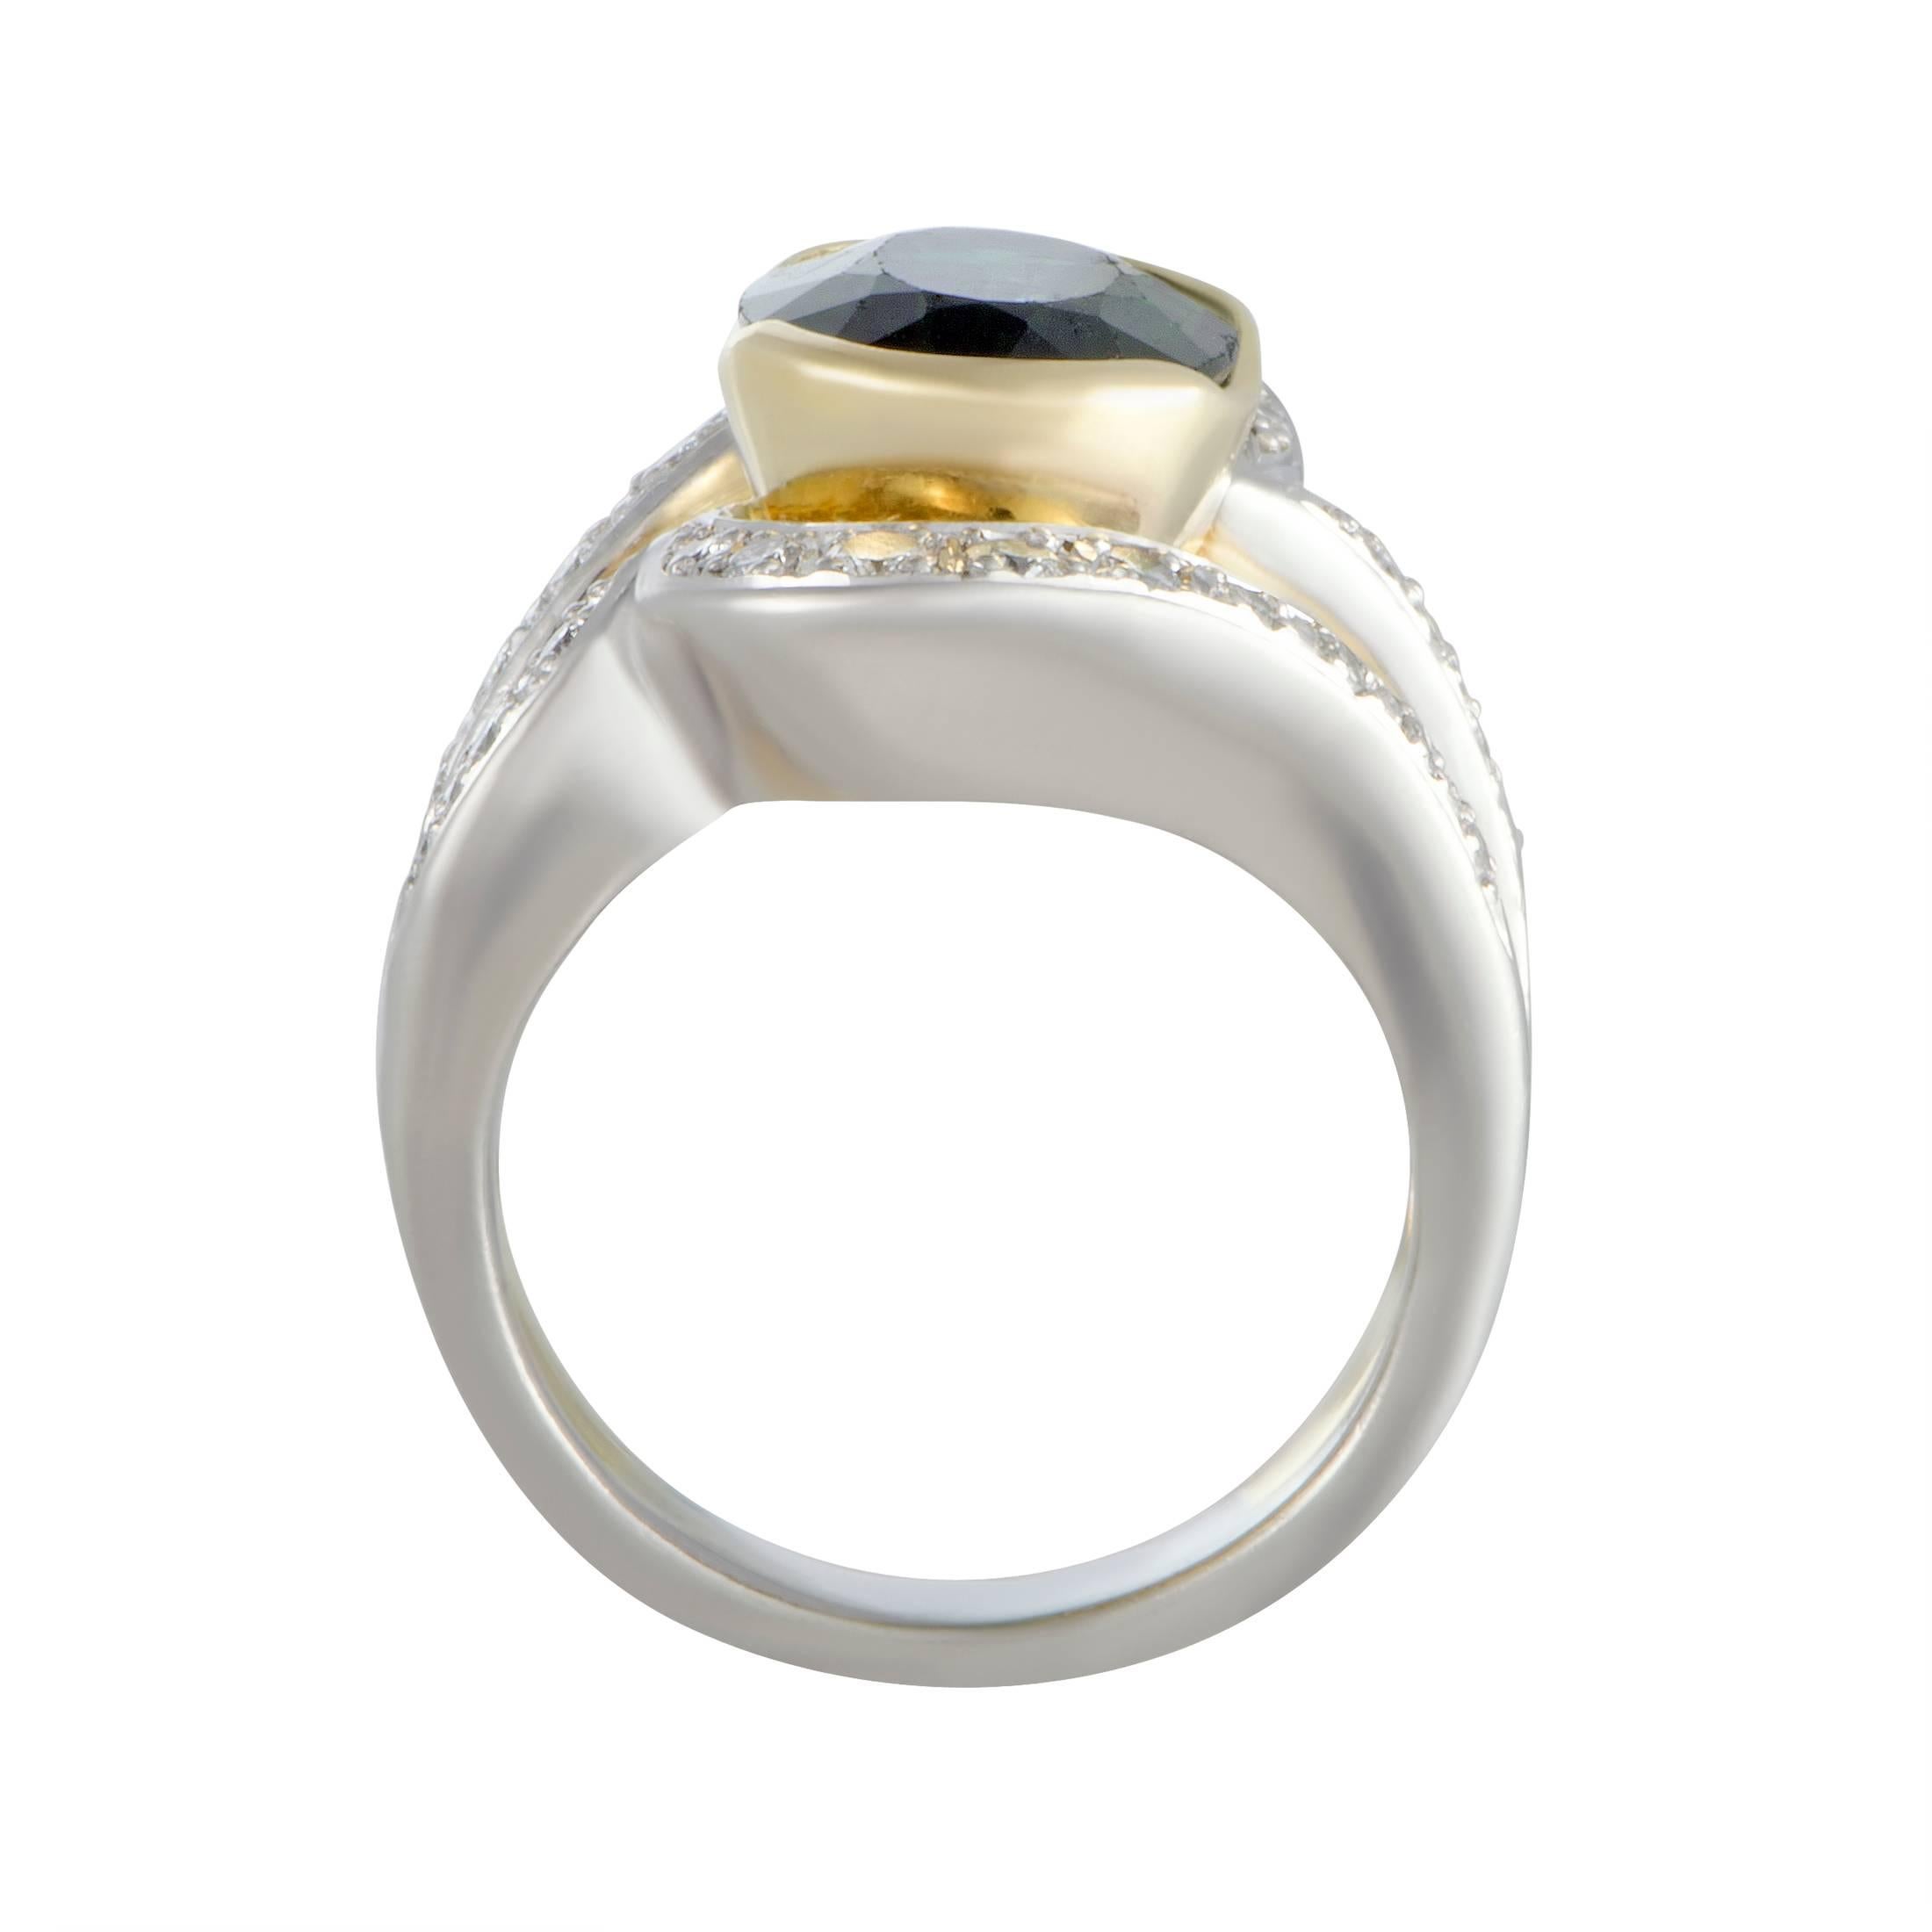 Beautifully crafted from the luxurious blend of platinum and 18K yellow gold, this spectacular ring boasts a stunningly prestigious appeal. The ring is set with 0.49 carats of diamond stones and with a striking green tourmaline that weighs 4.35